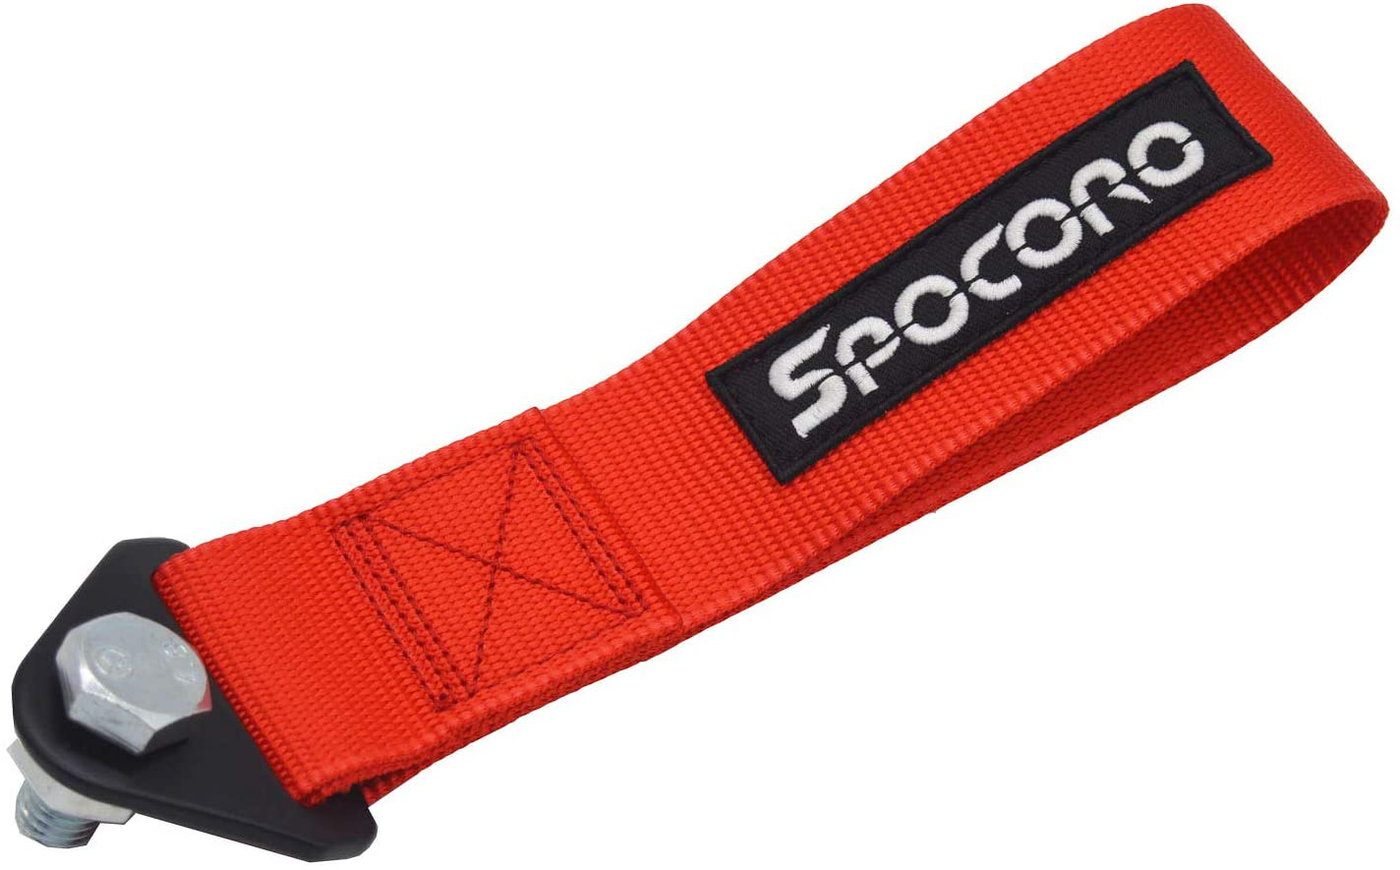 Spocoro SPTOWS-01BLU High Strength Racing Style Tow Strap for Front or Rear Bumper,Blue (Pack of 1)